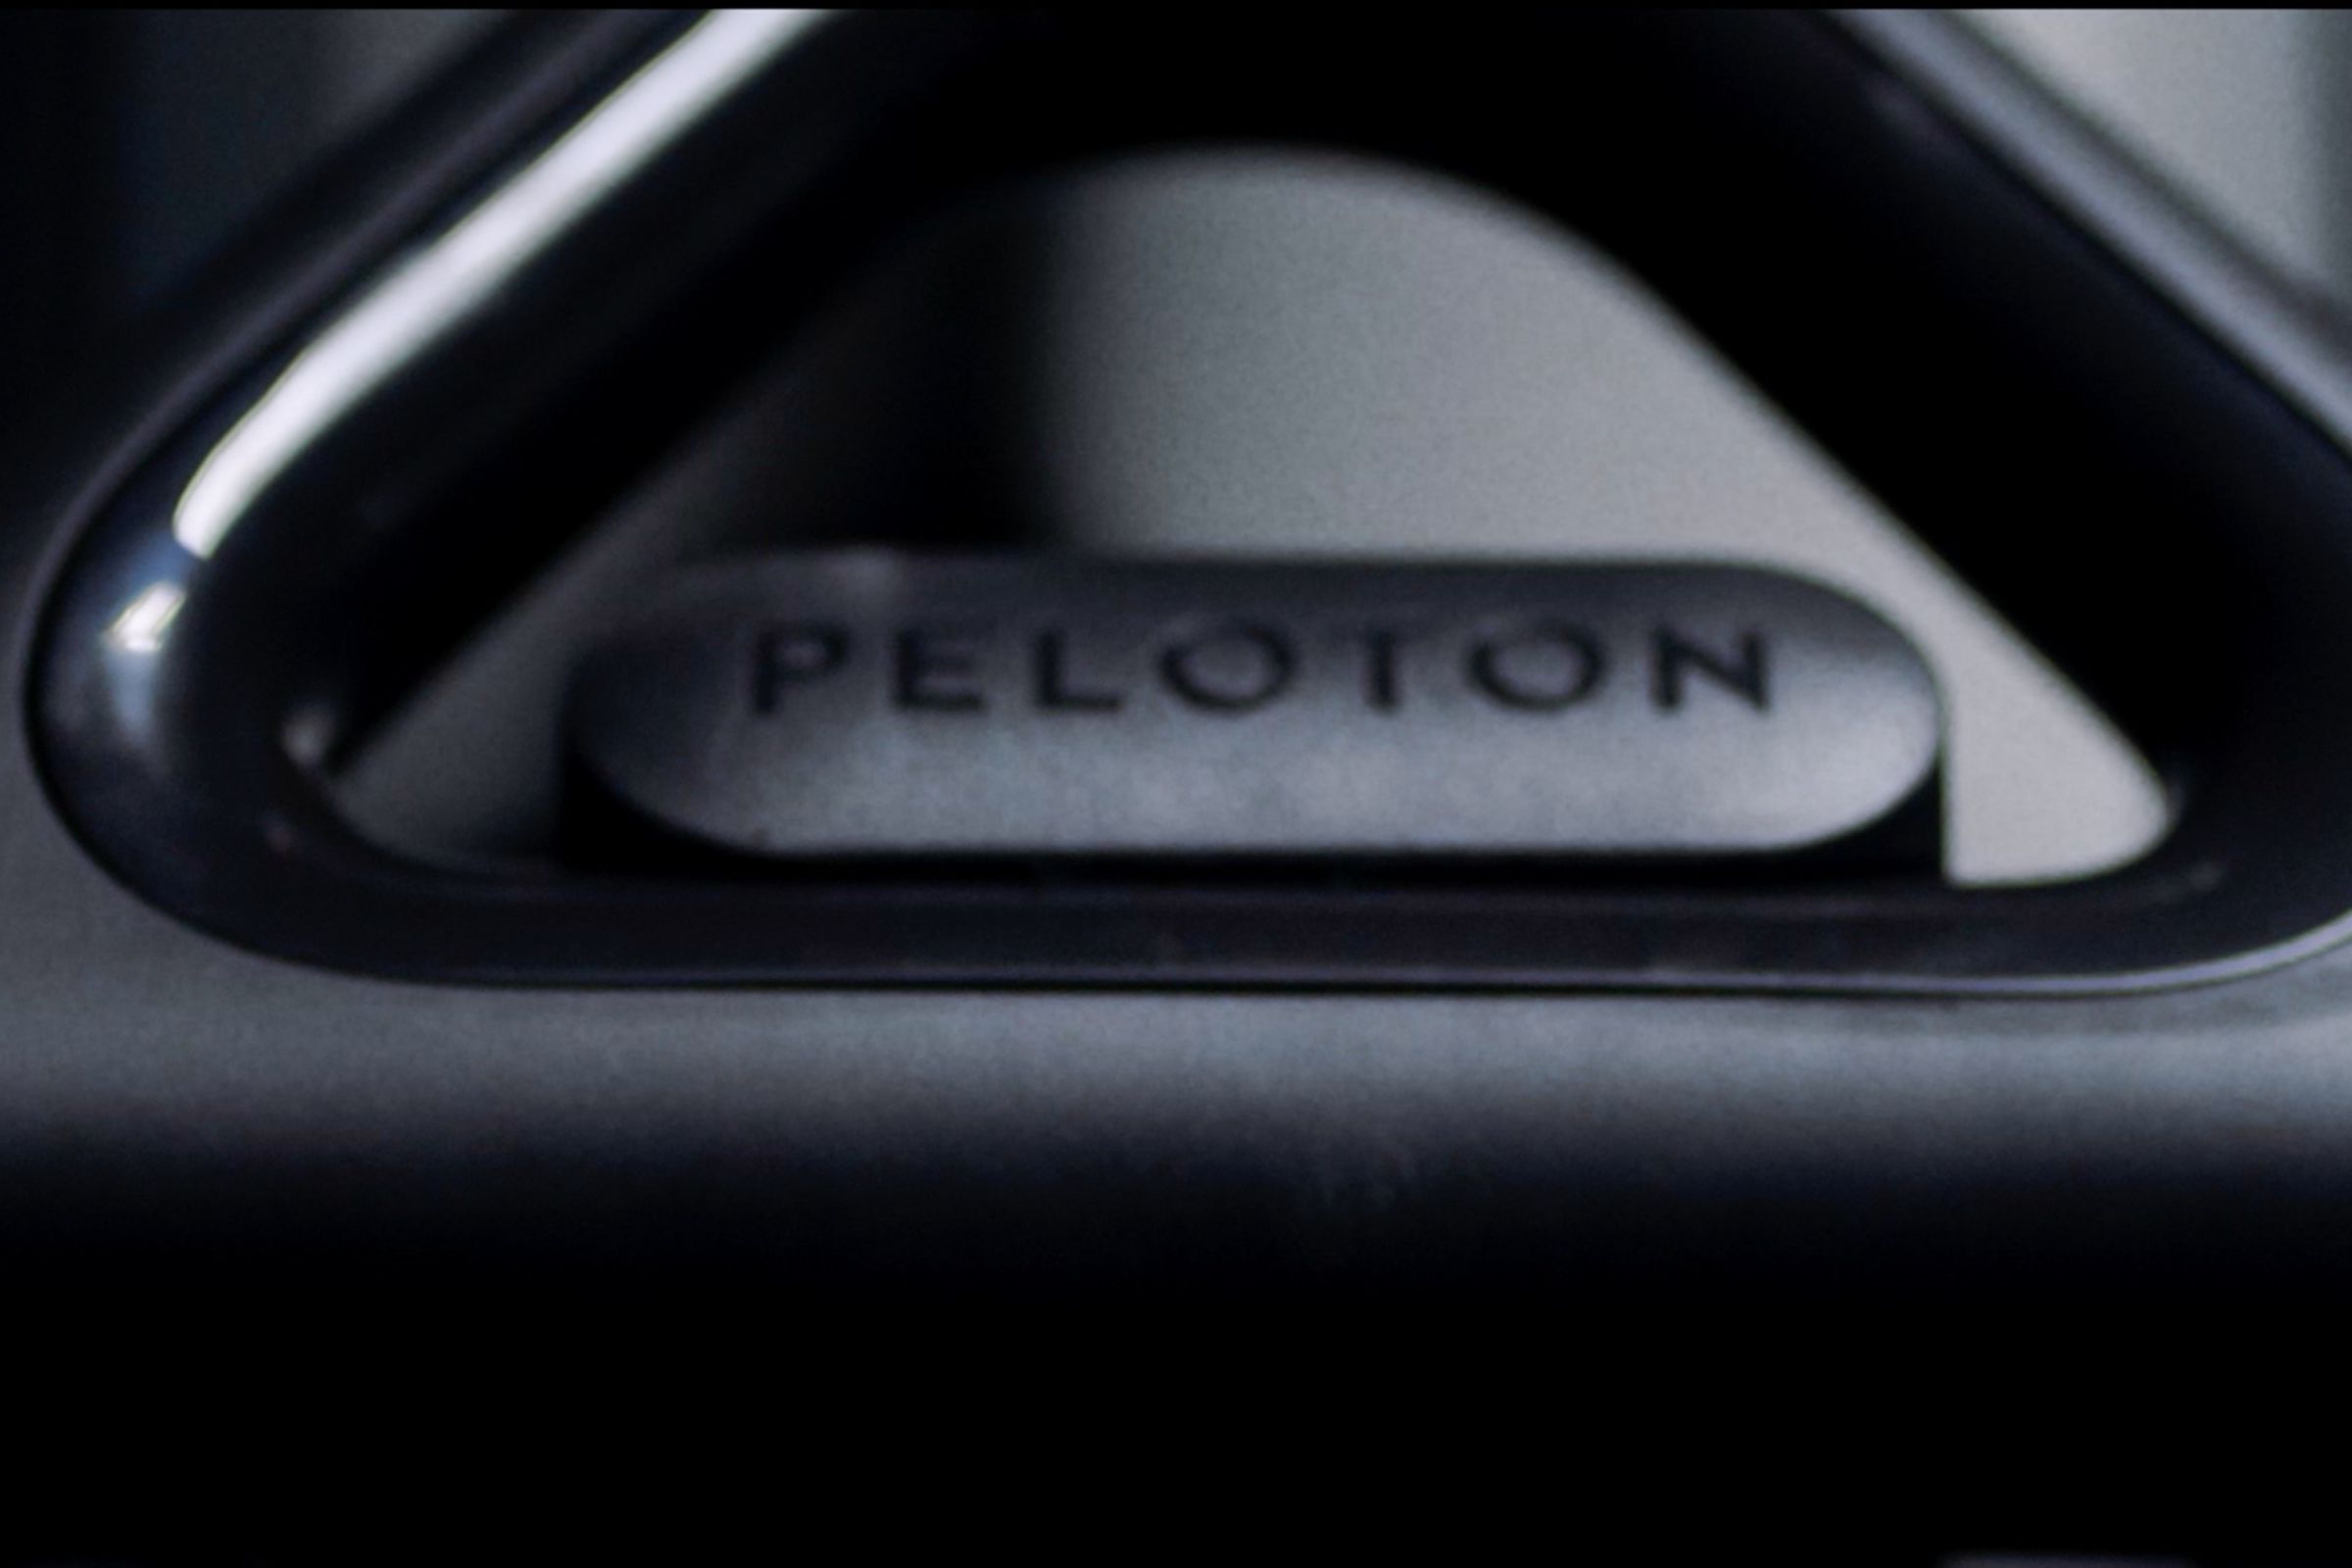 The Peloton rower’s handle. I was not kidding when I said they were teasing the machine.